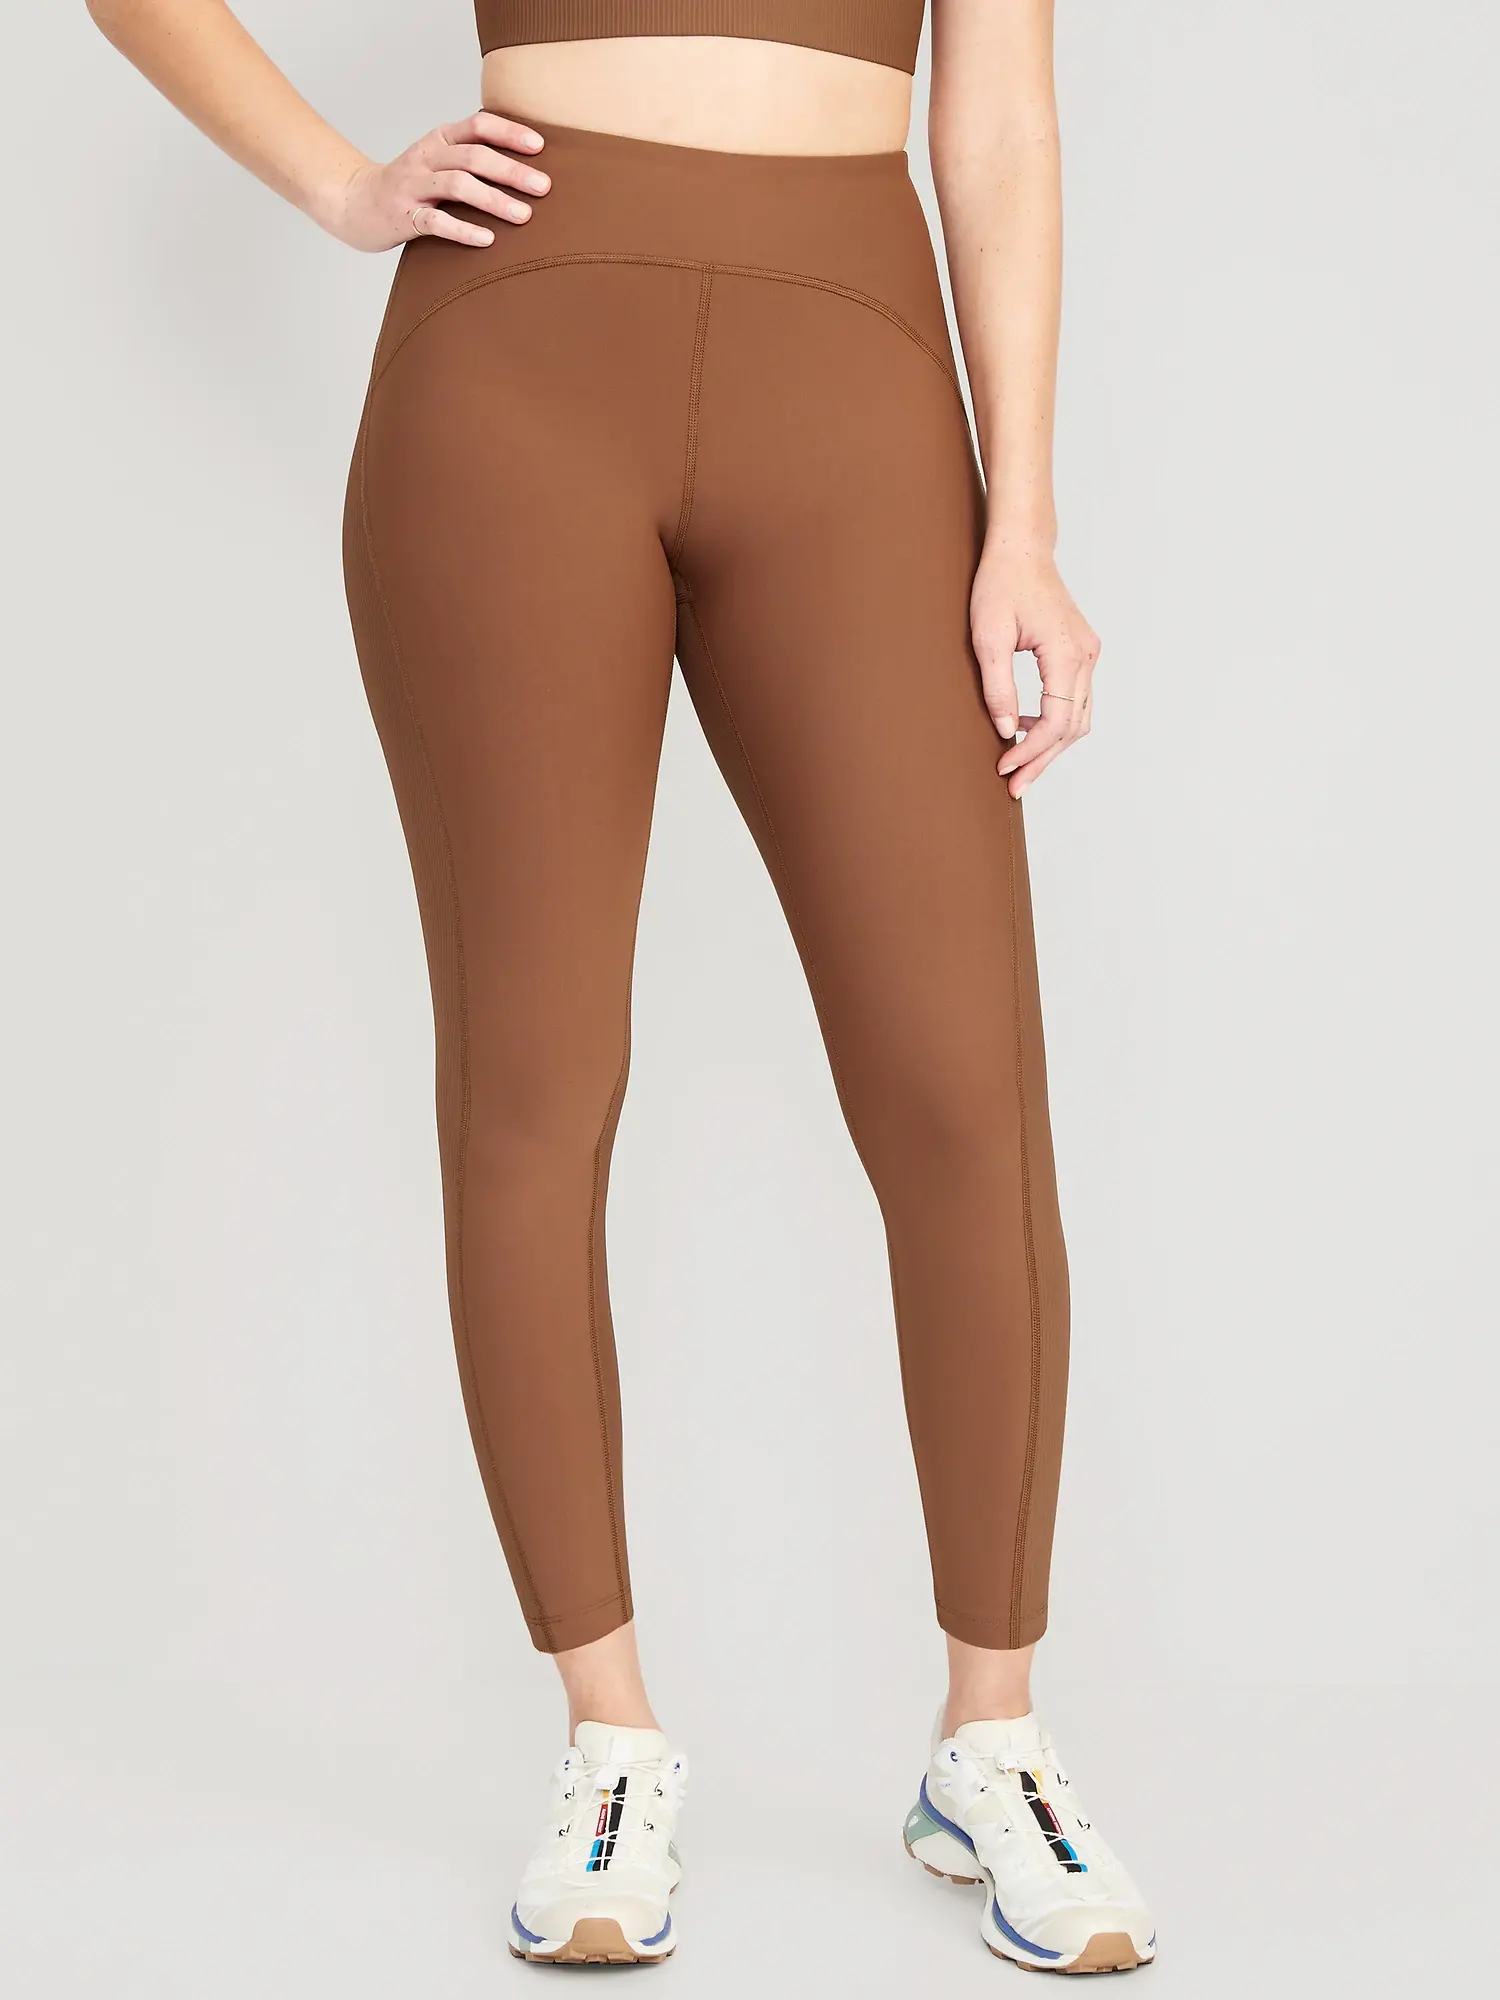 Old Navy High-Waisted PowerSoft 7/8 Mixed-Fabric Leggings for Women brown. 1